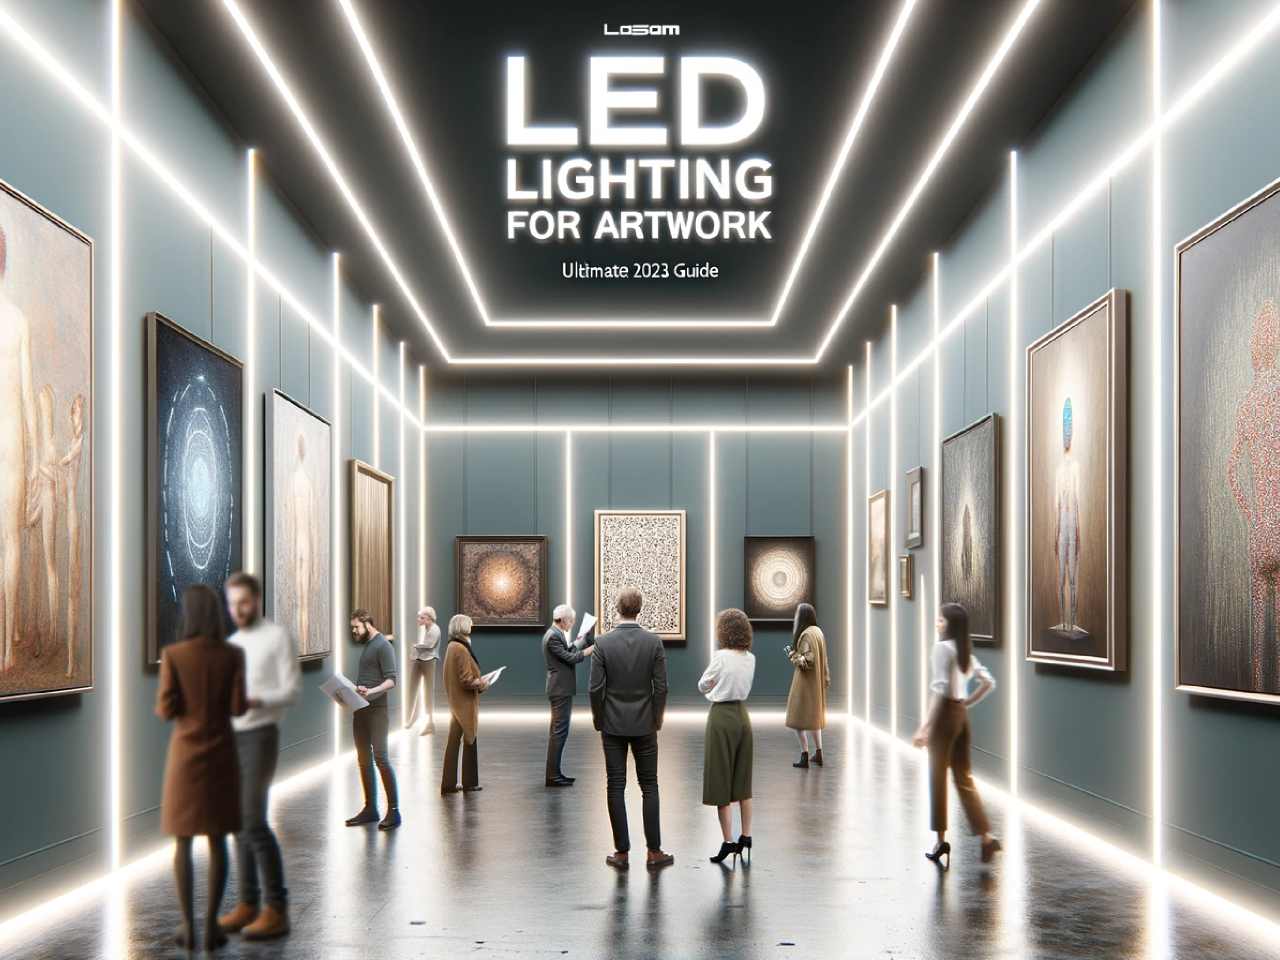 7 Steps to Perfect LED Lighting for Artwork [Ultimate 2023 Guide]